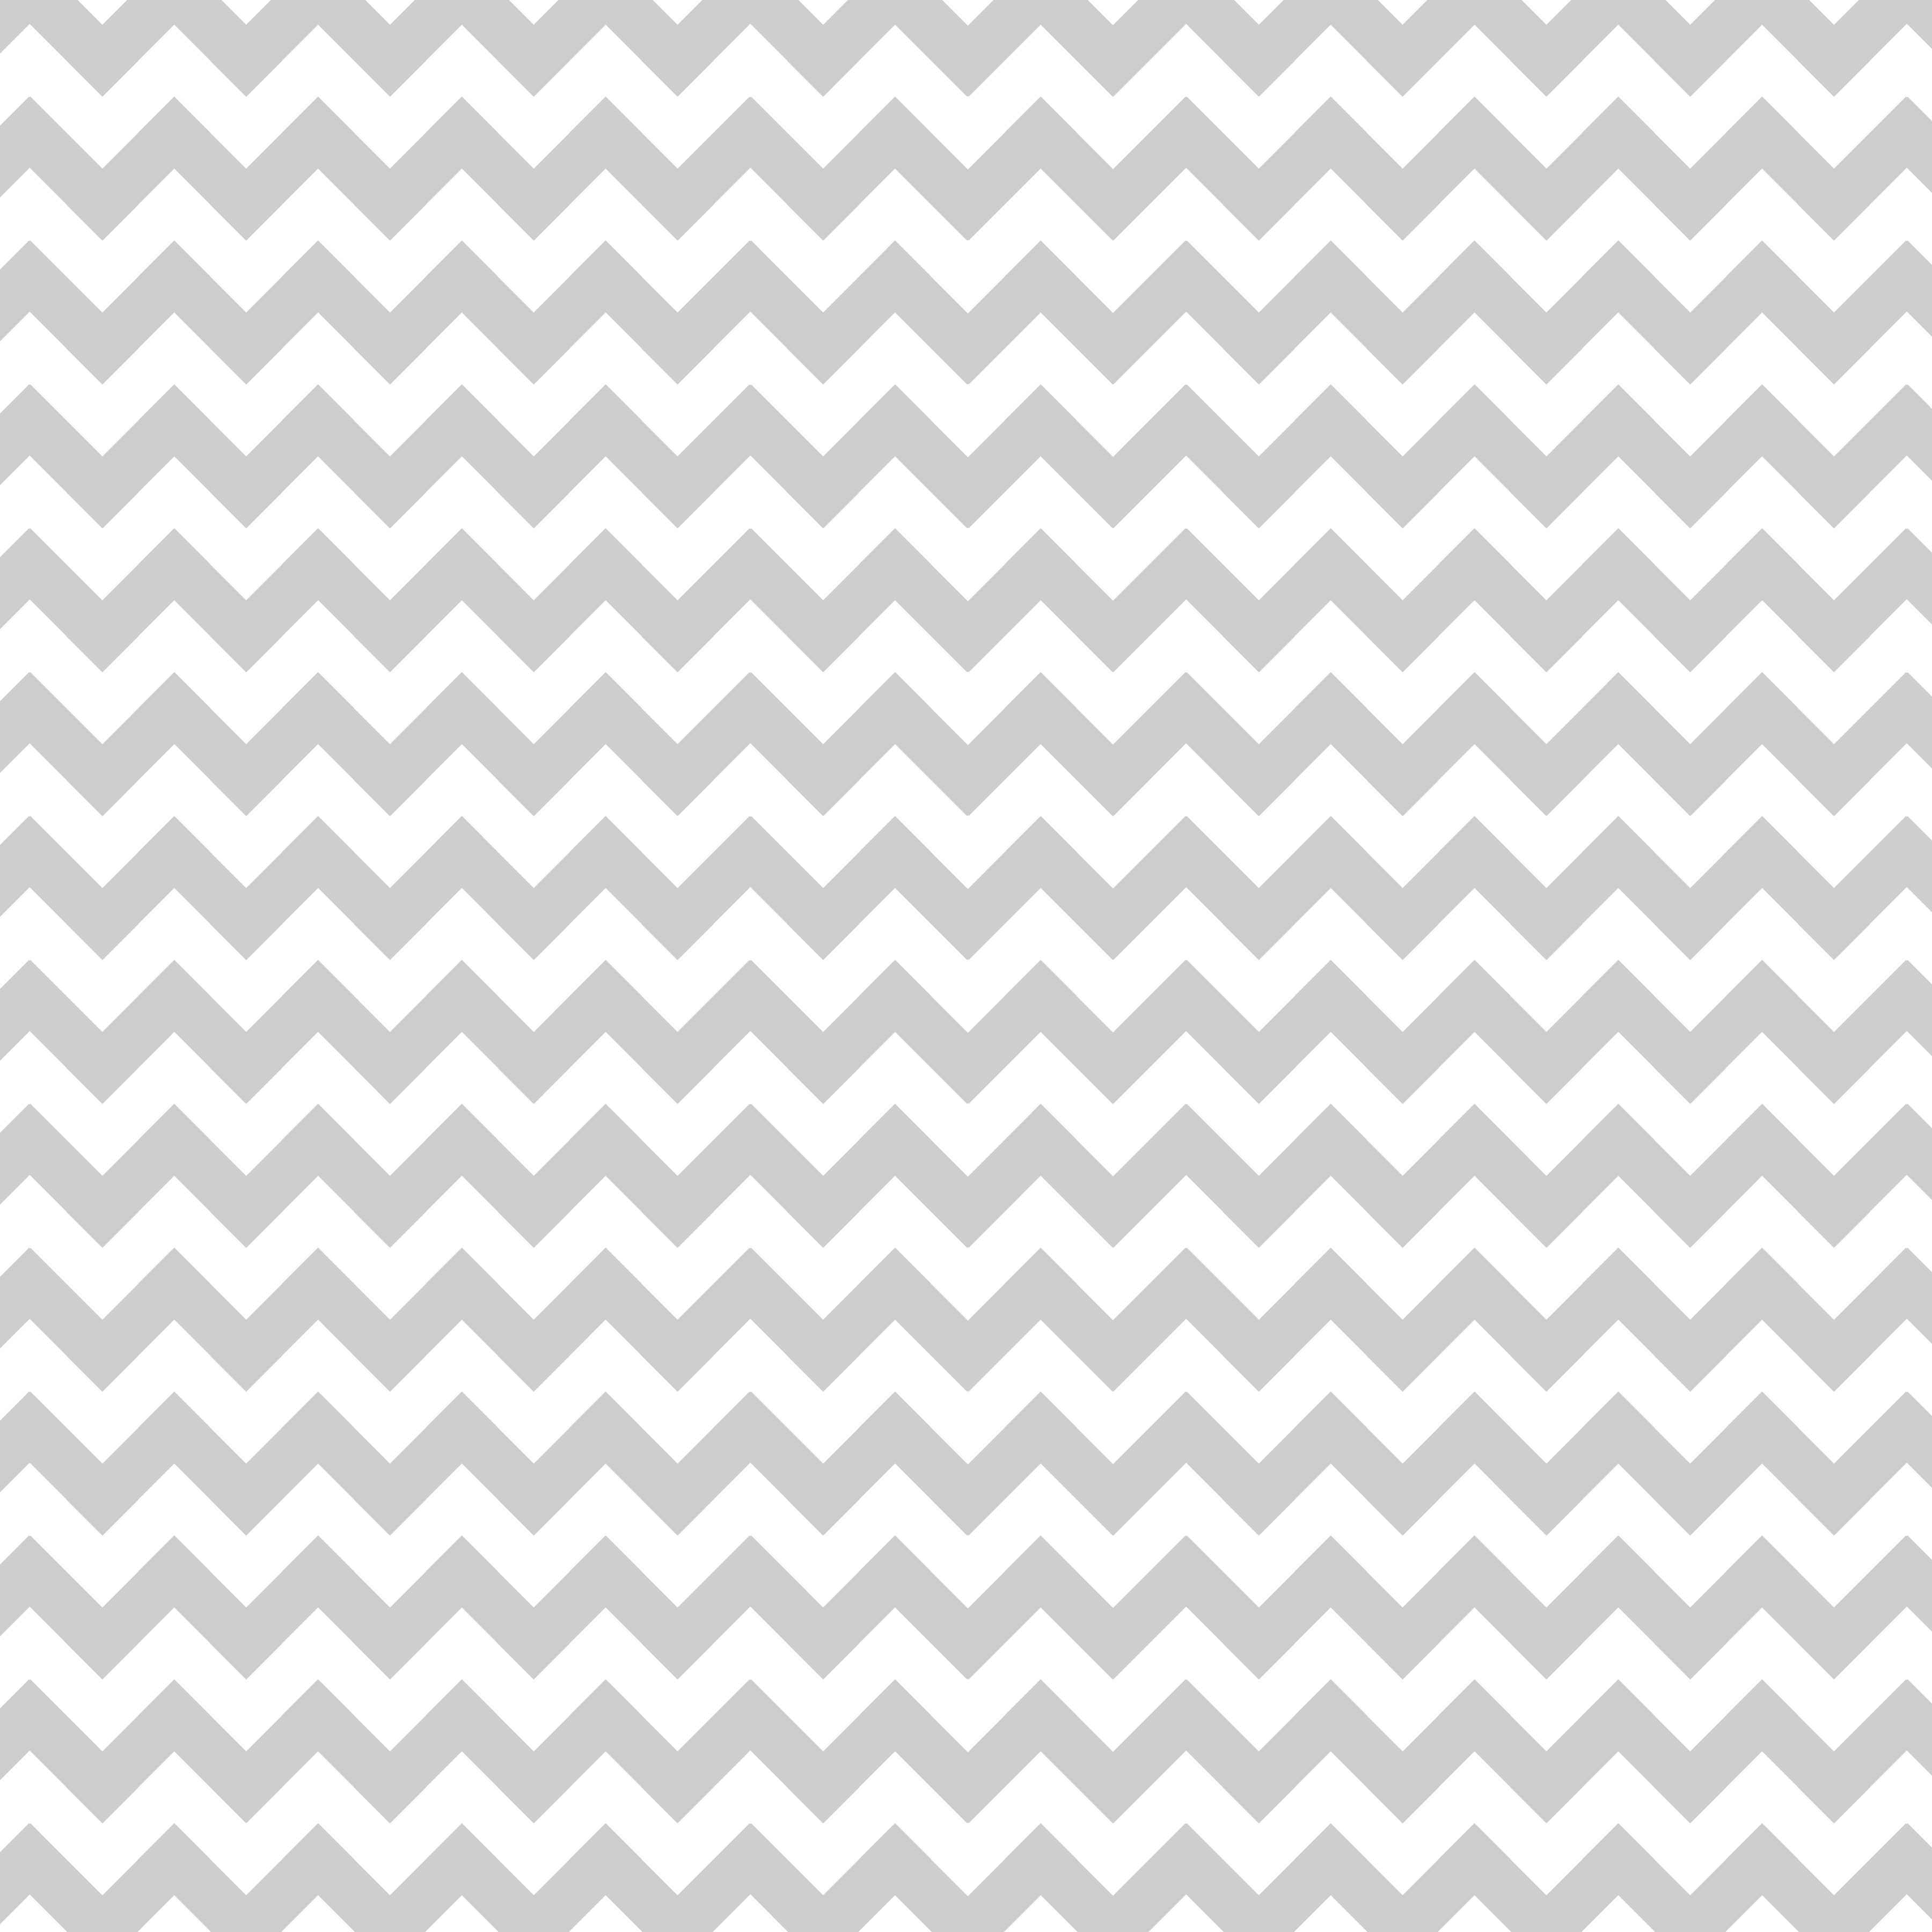 Light grey patterned clipart.